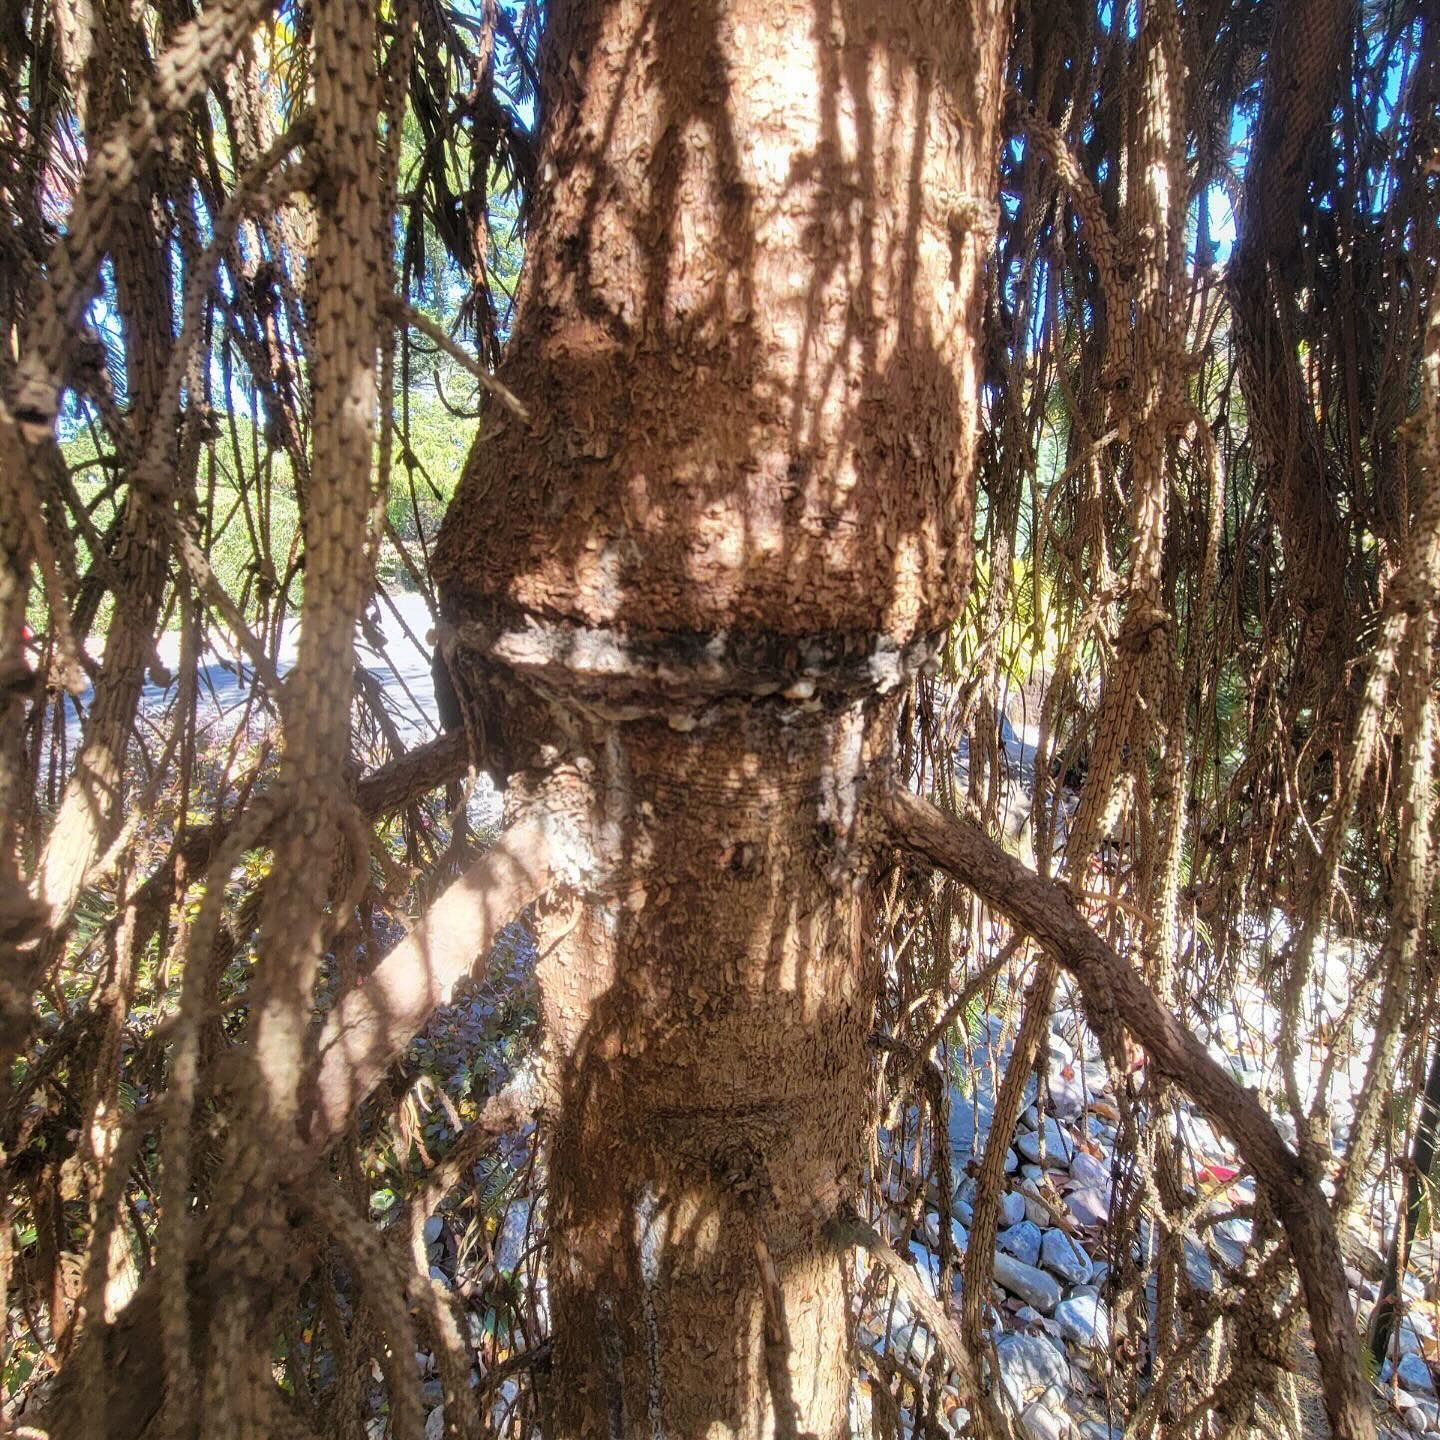 Spruce tree dying from girdling due to straps - BurkholderPHC